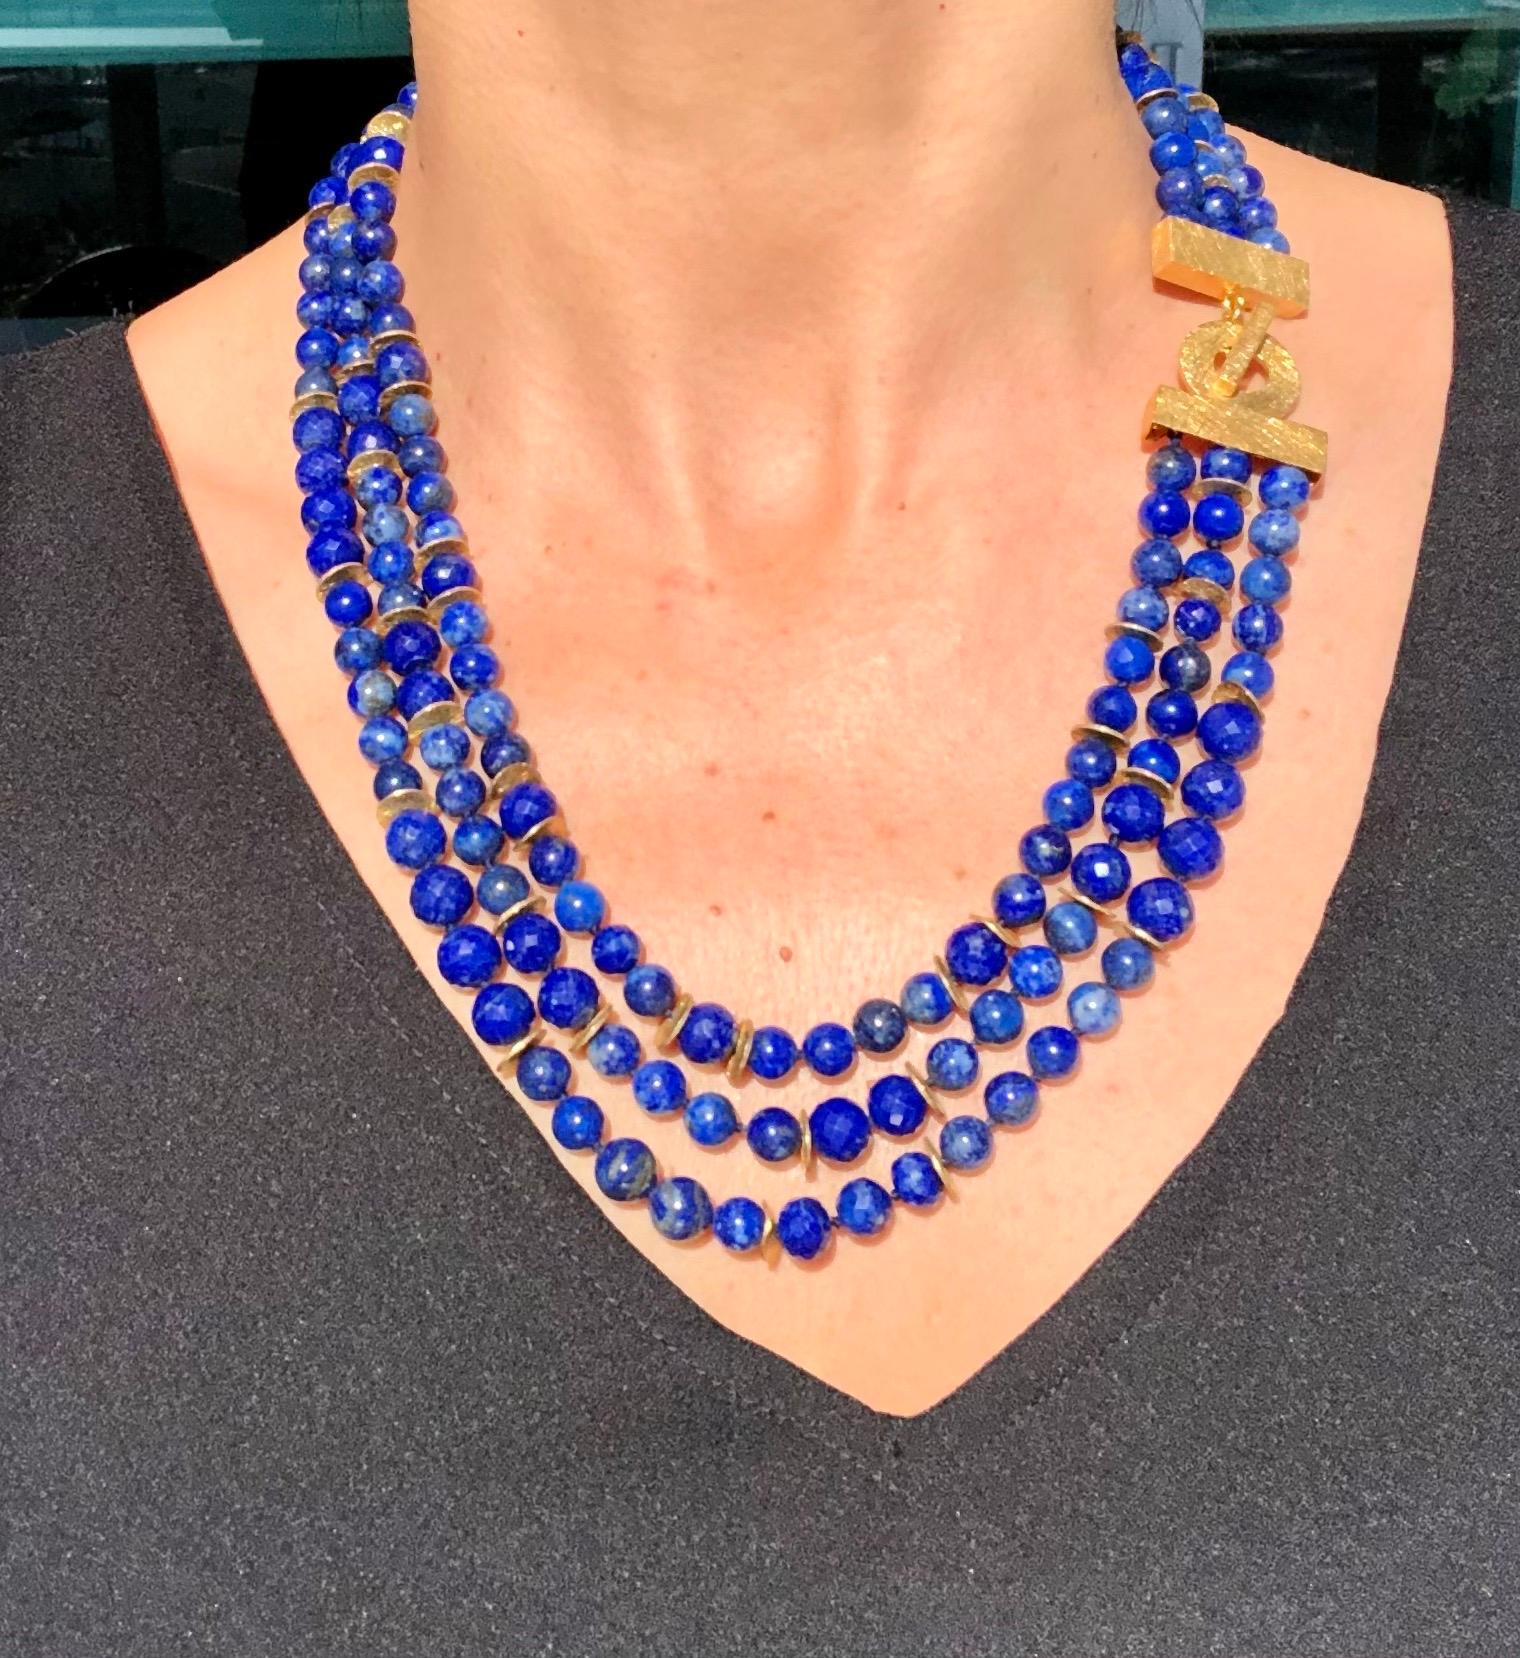 One-of-a-Kind

Indulge in the timeless beauty of Lapis Lazuli with this exquisite necklace. Carefully crafted from beautifully matched 8mm Lapis Lazuli beads sourced from Afghanistan, this necklace features three graduated strands that elegantly